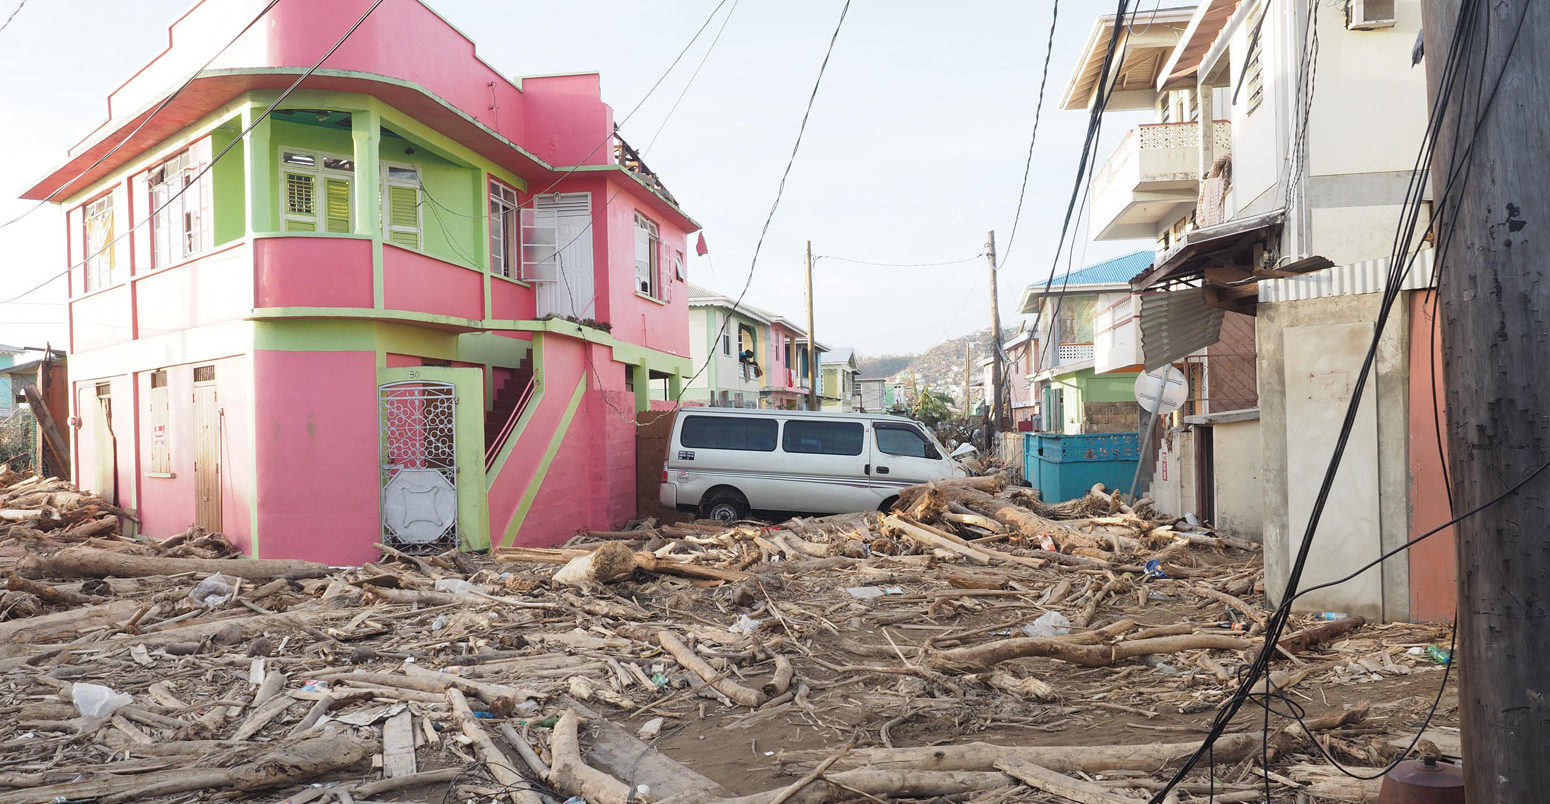 Hurricane Maria destroyed everything during its passage on the island of Dominica